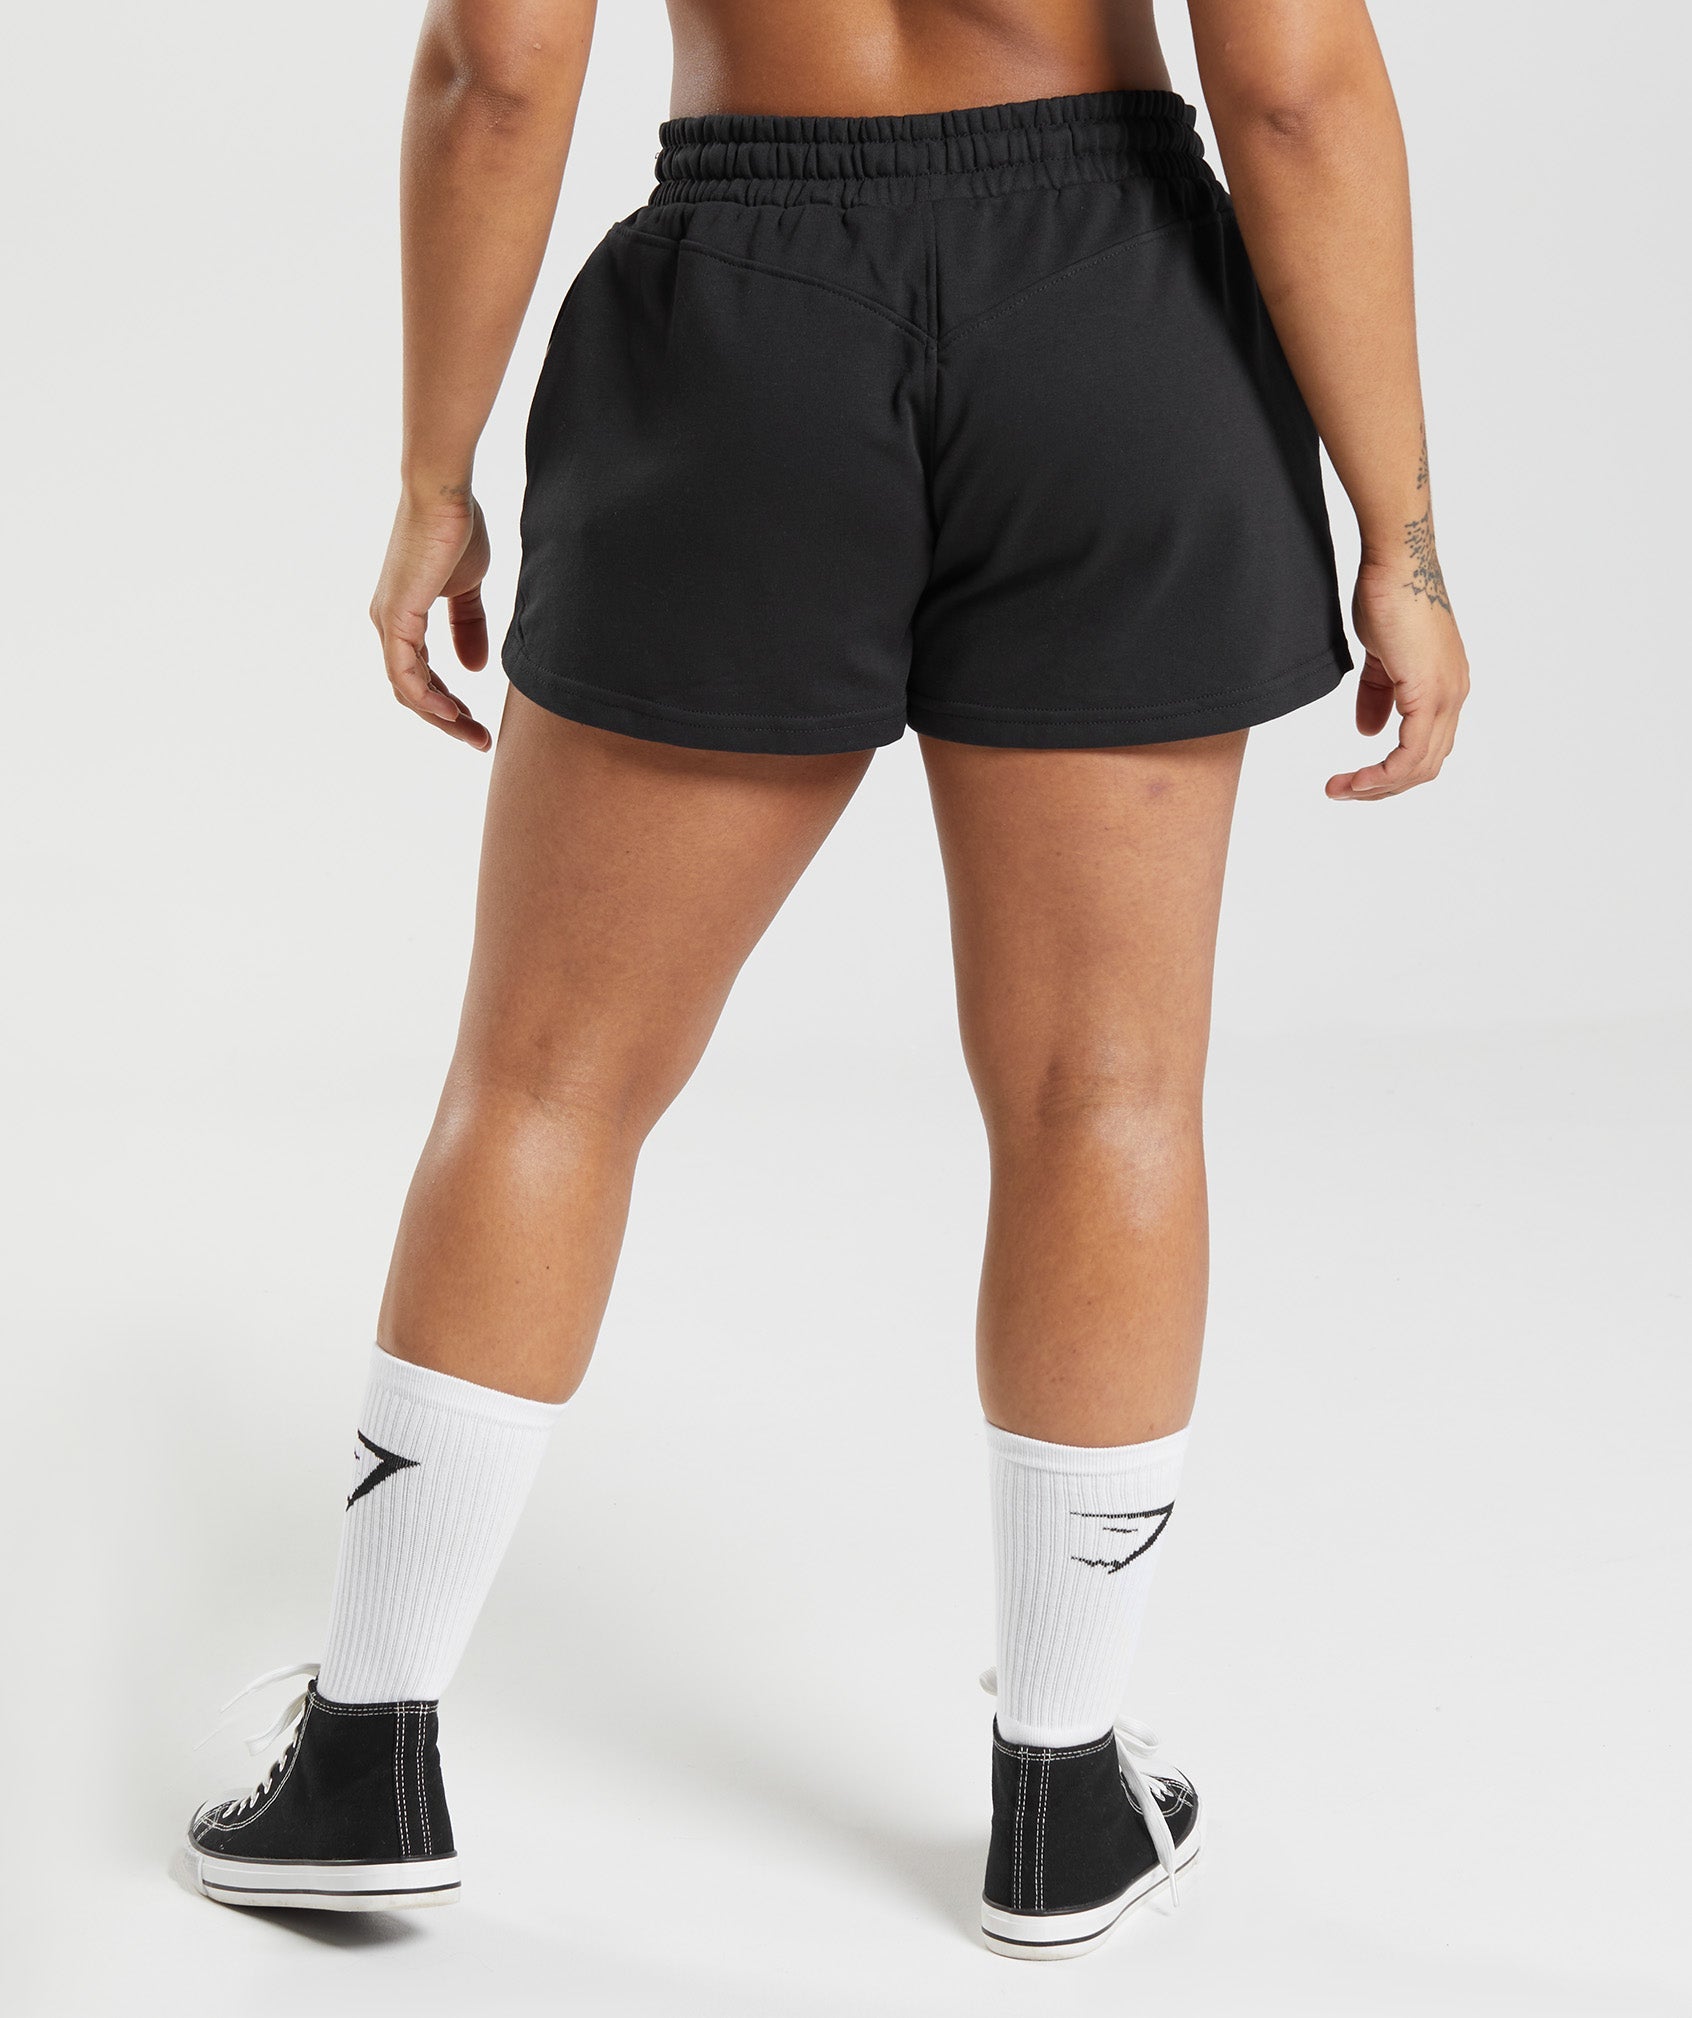 Legacy Shorts in Black - view 2